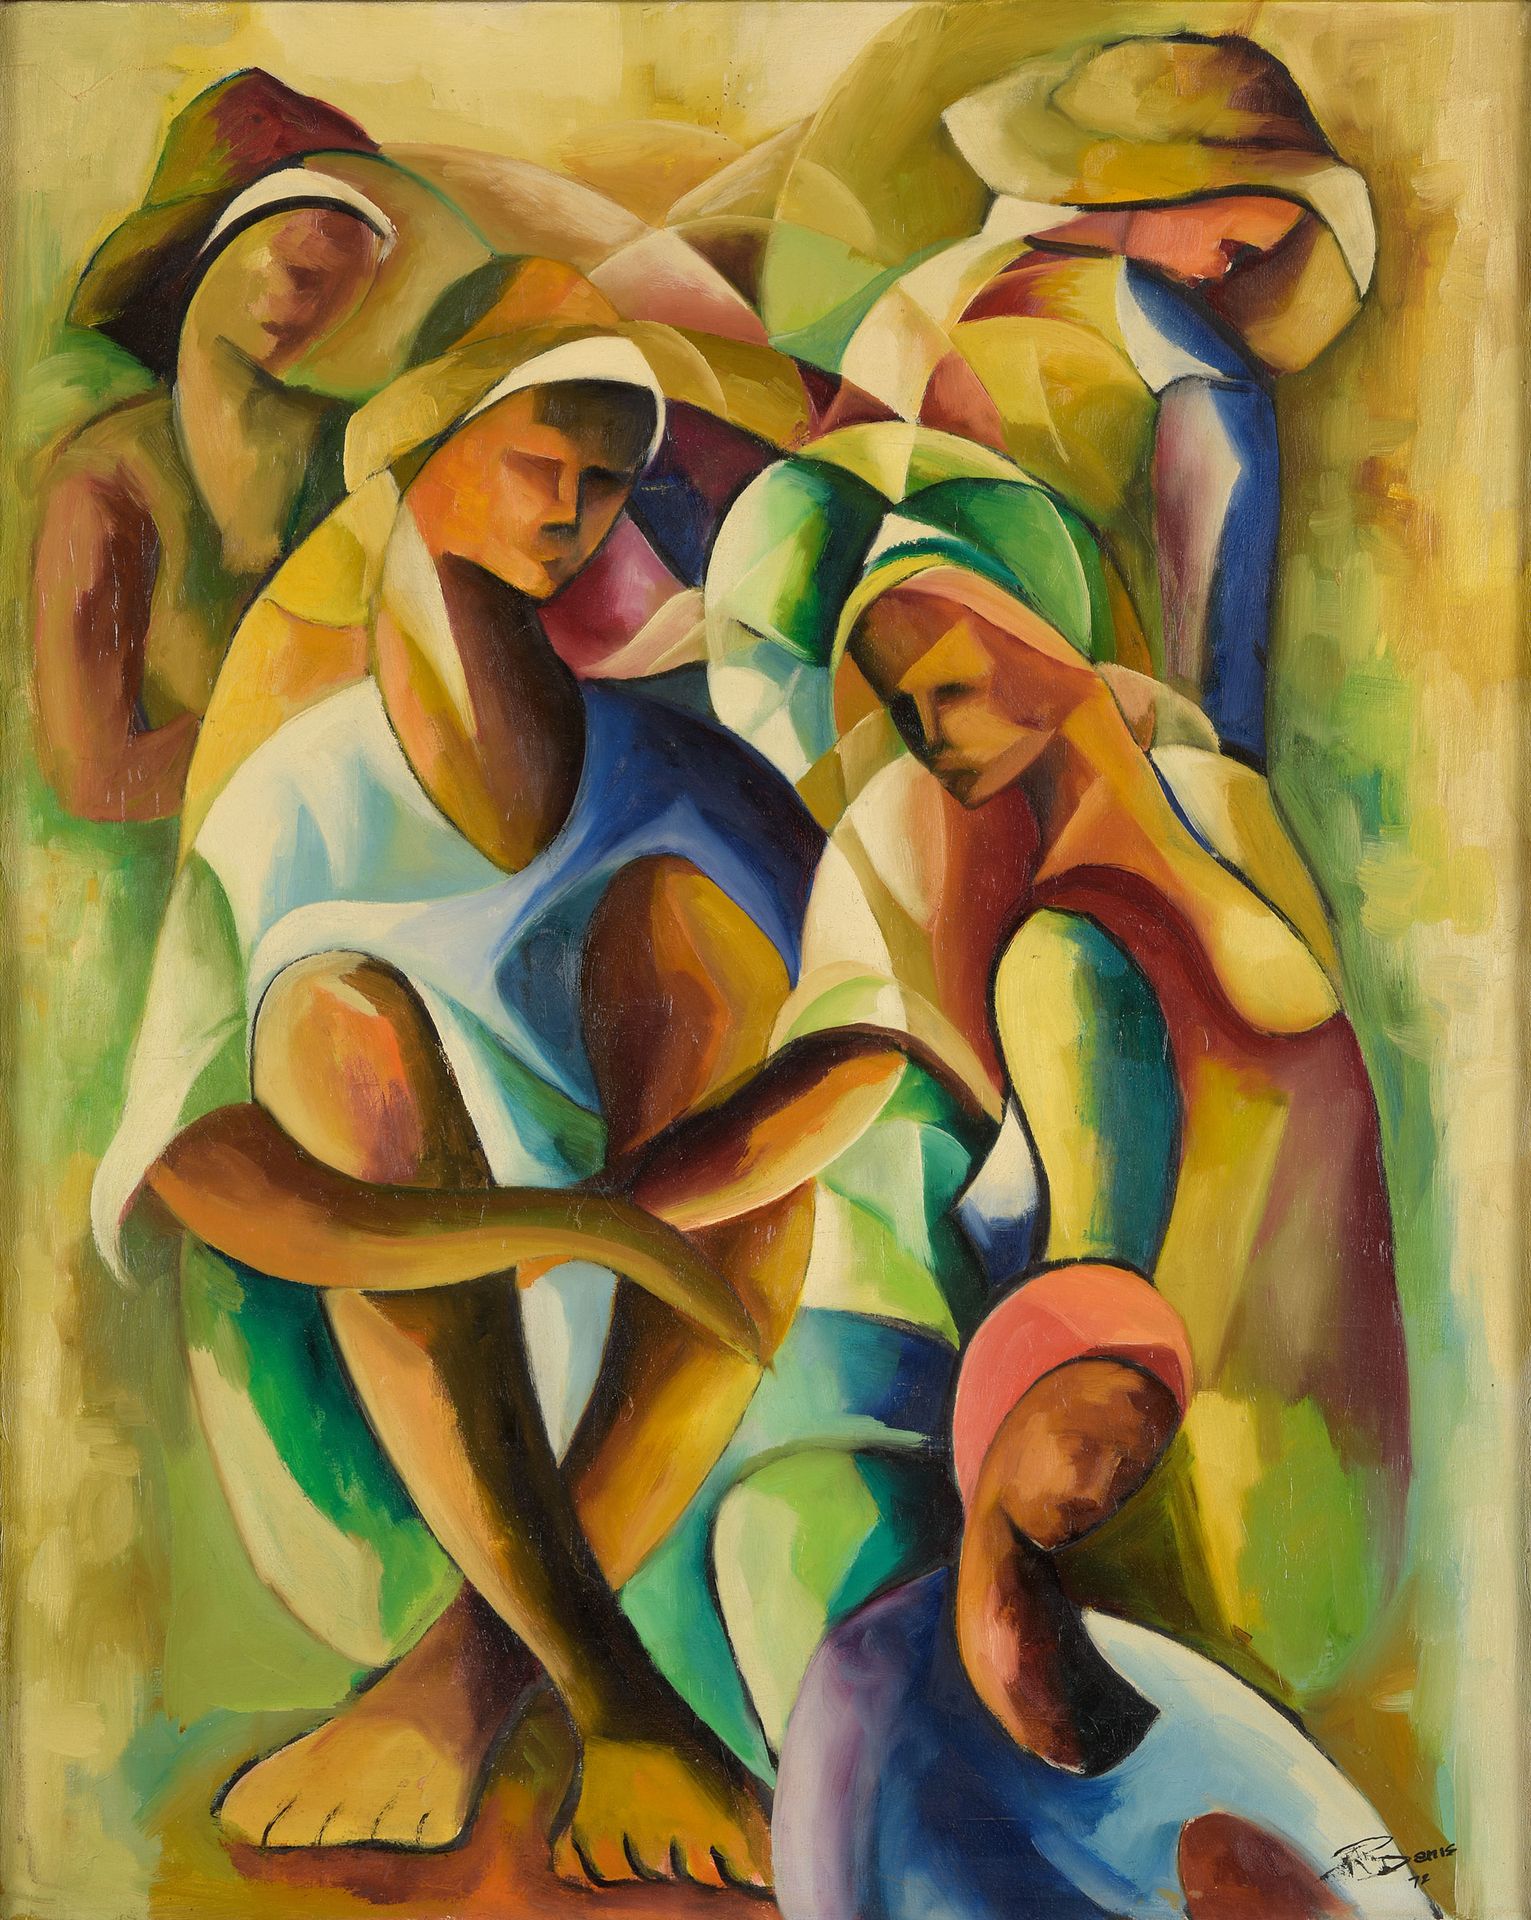 Undeutlich signiert Indistinctly signed South America c. 1970
Women. Oil on canv&hellip;